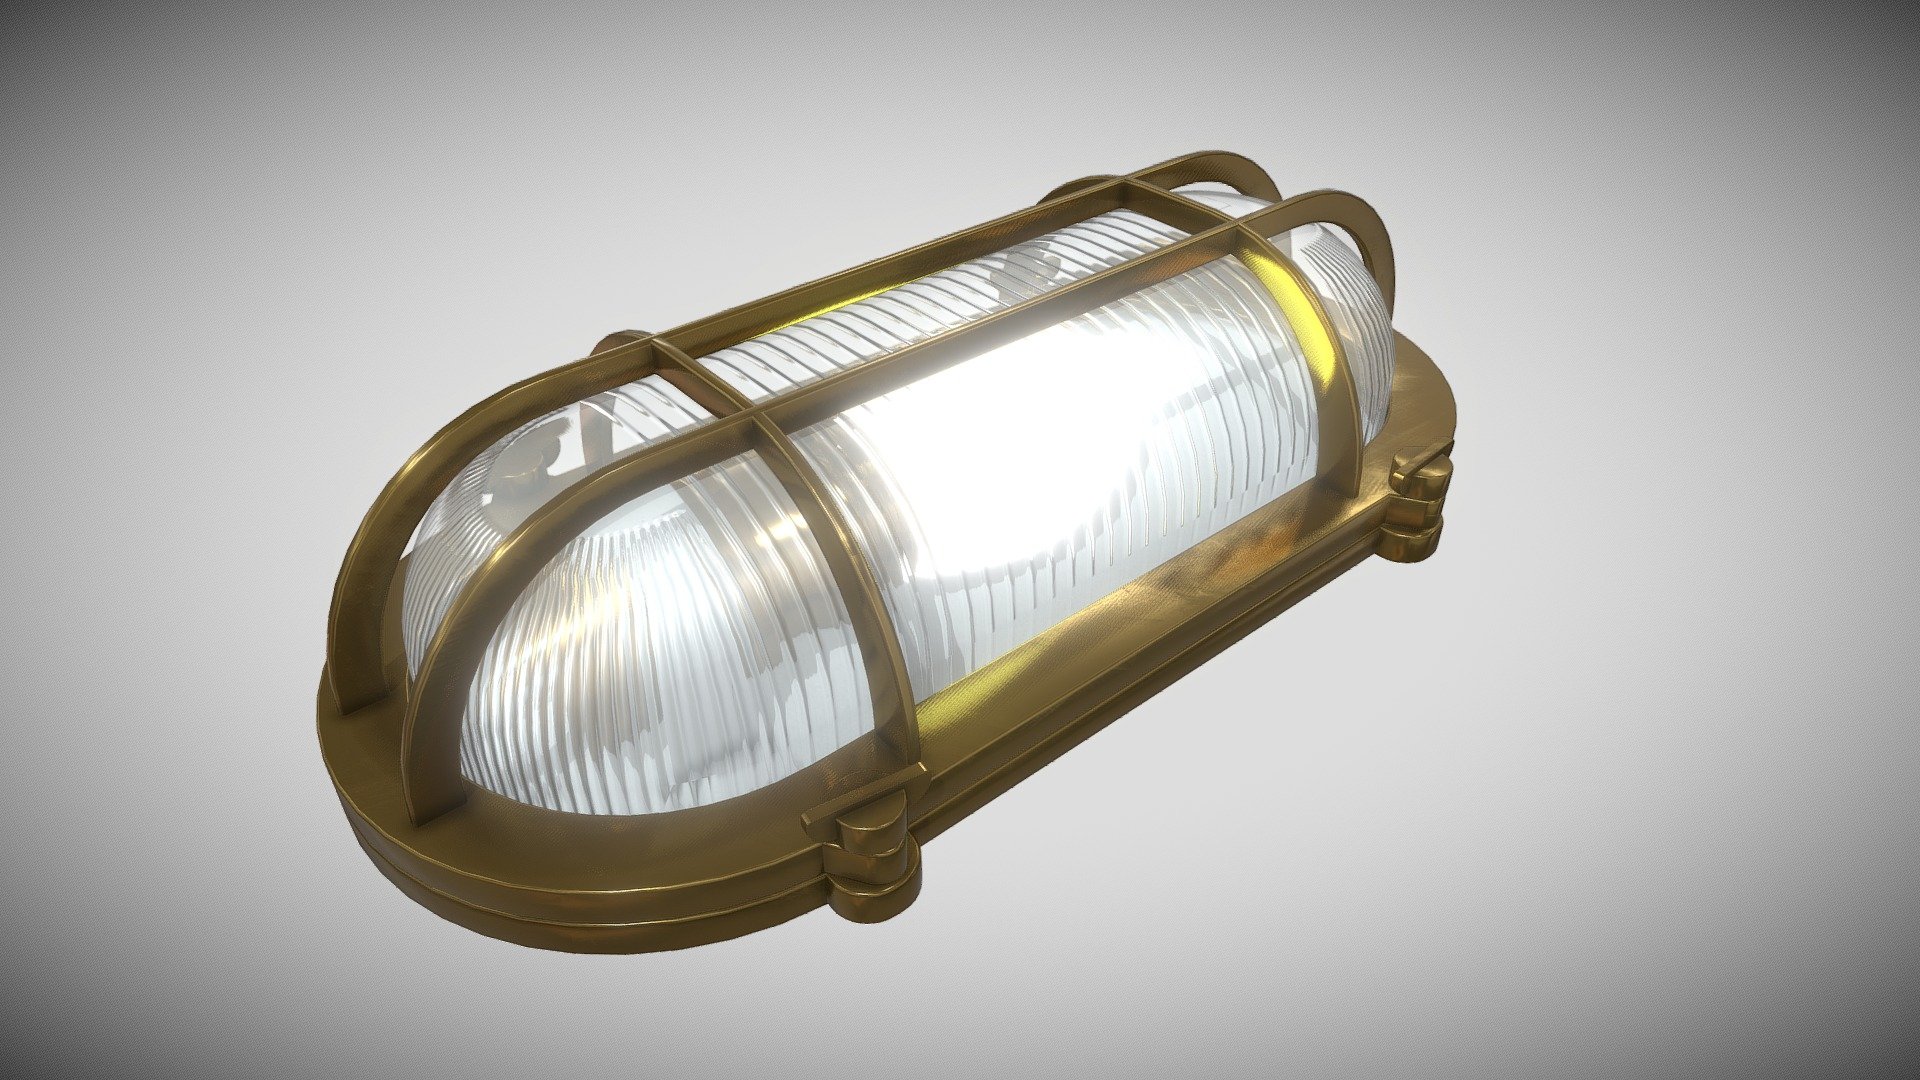 A realistic model of a brass bulkhead light, suitable for marine scenes. Super low-poly, with smudge textures. This bulkhead light model is made of brass with textures glass. Bulb inside light 3d model